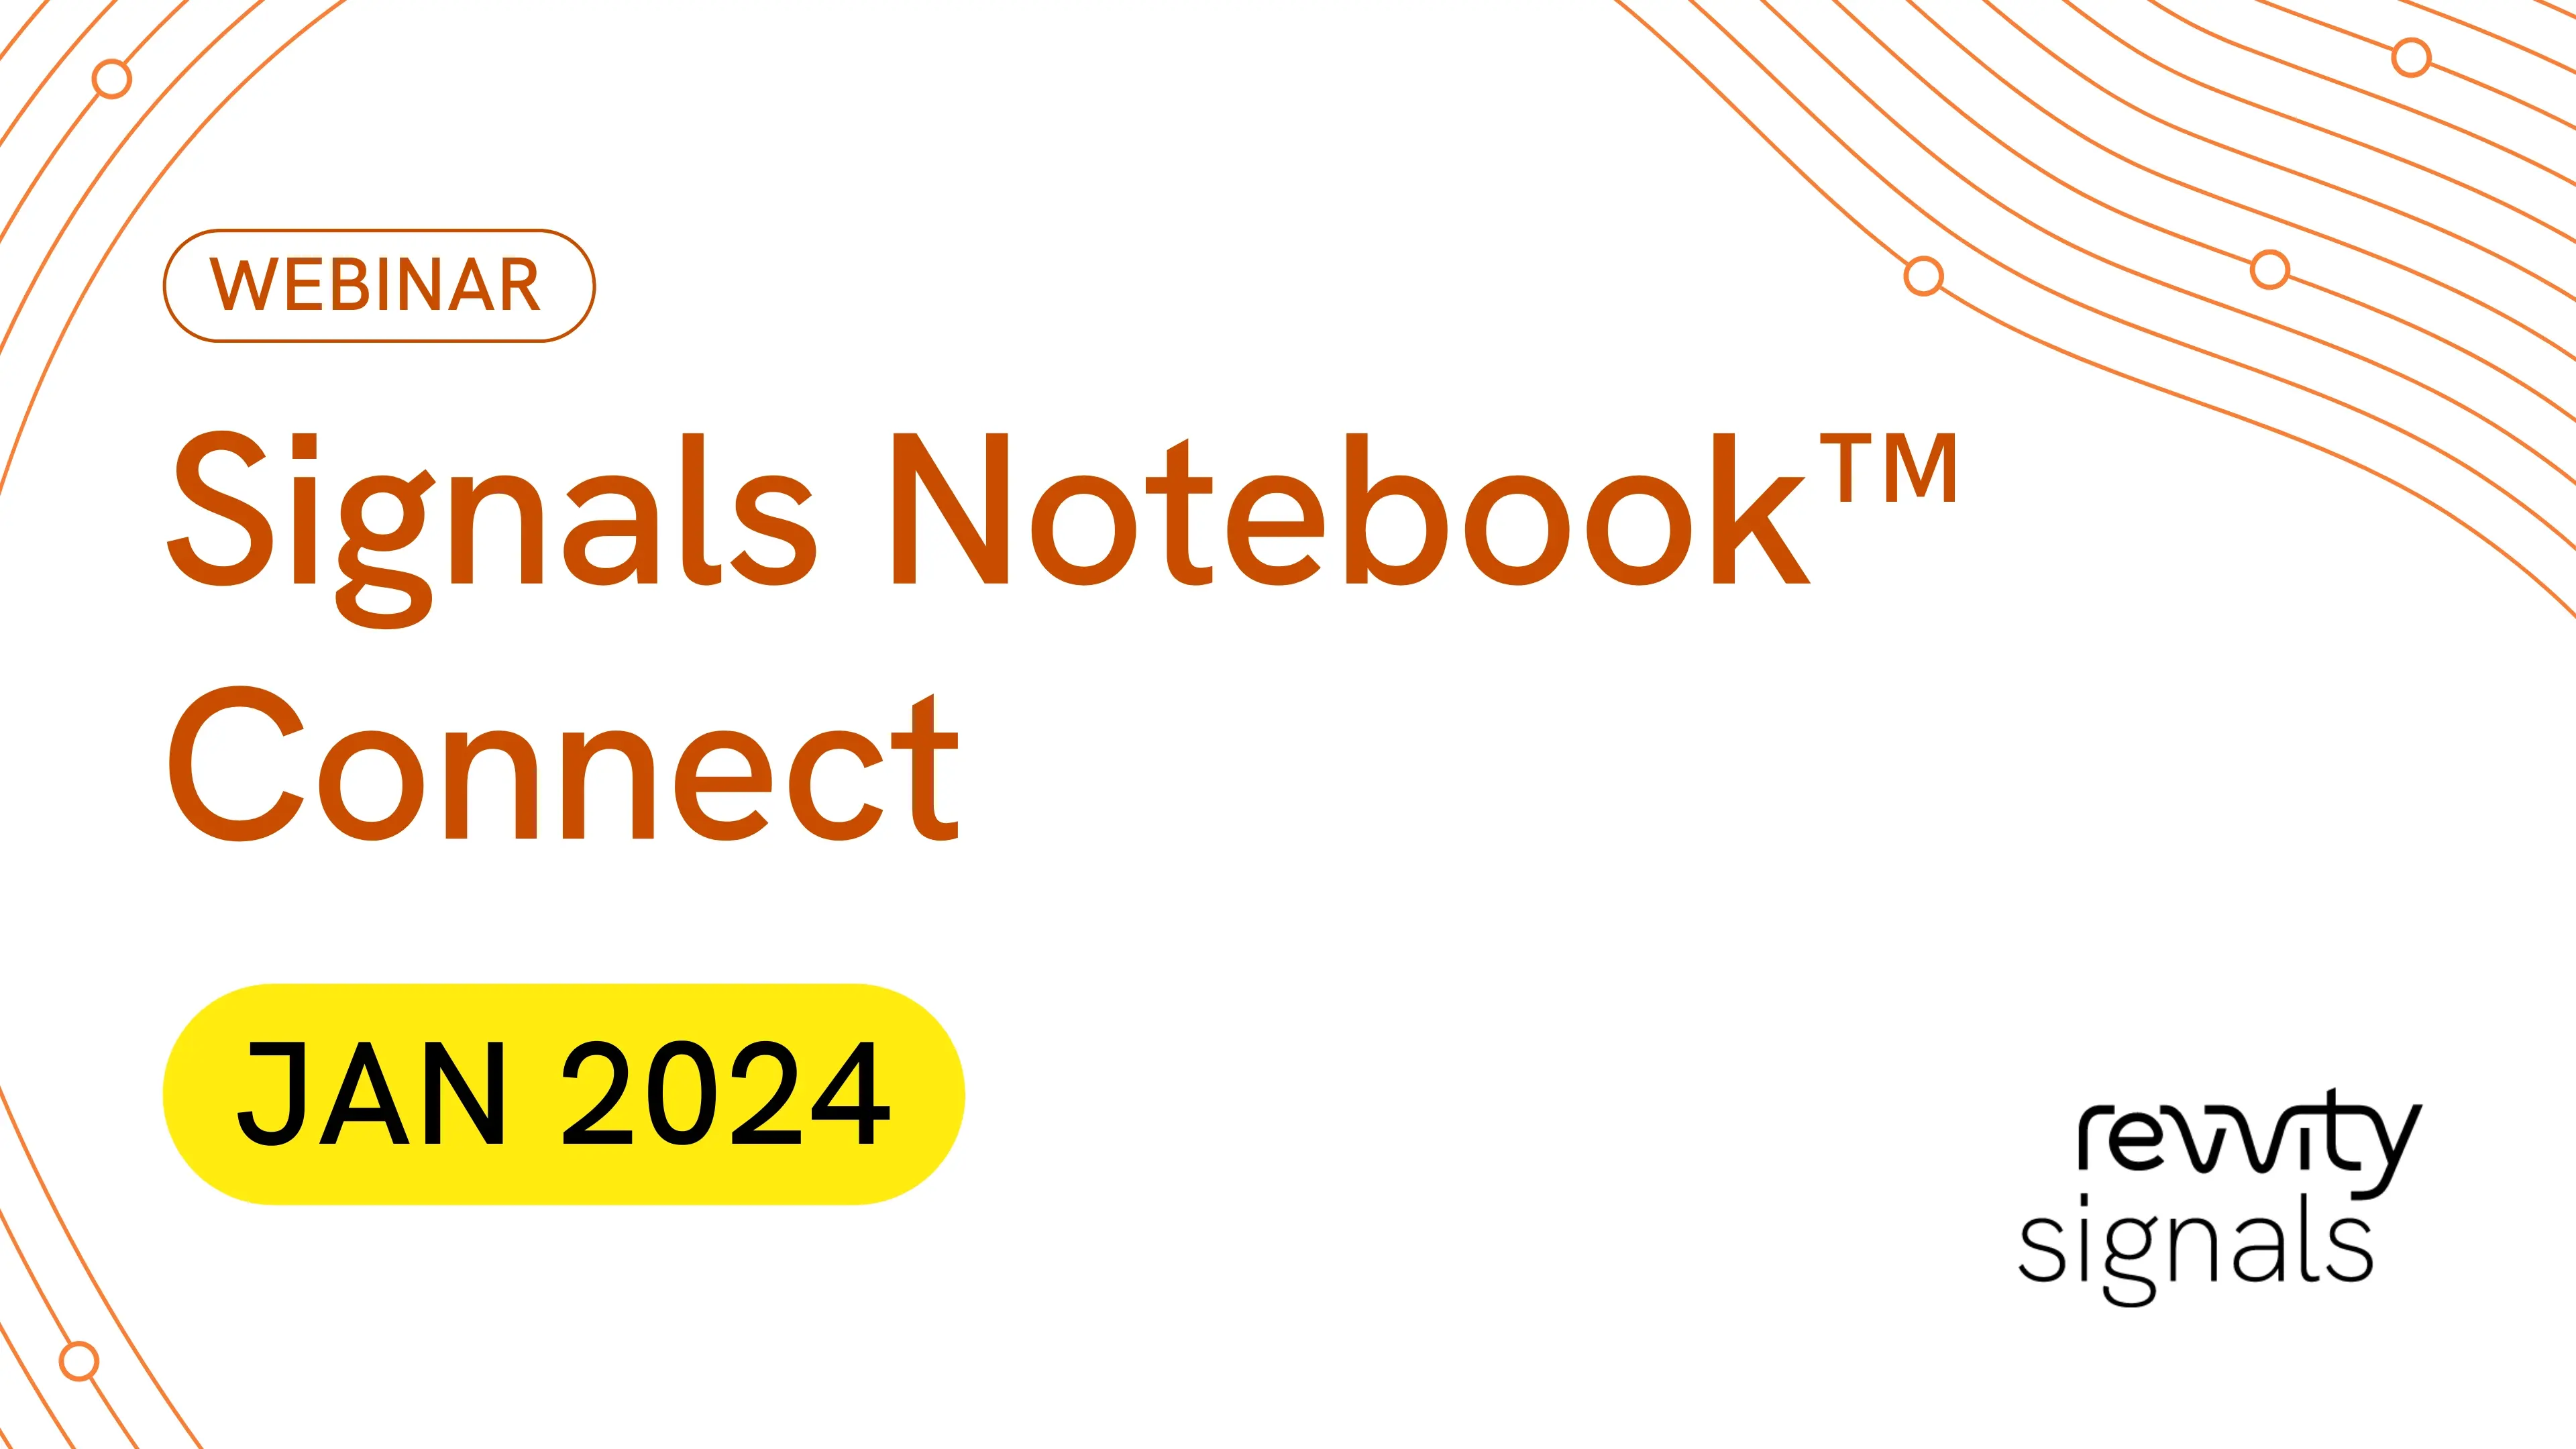 Watch Signals Notebook Connect: January 2024 on Vimeo.